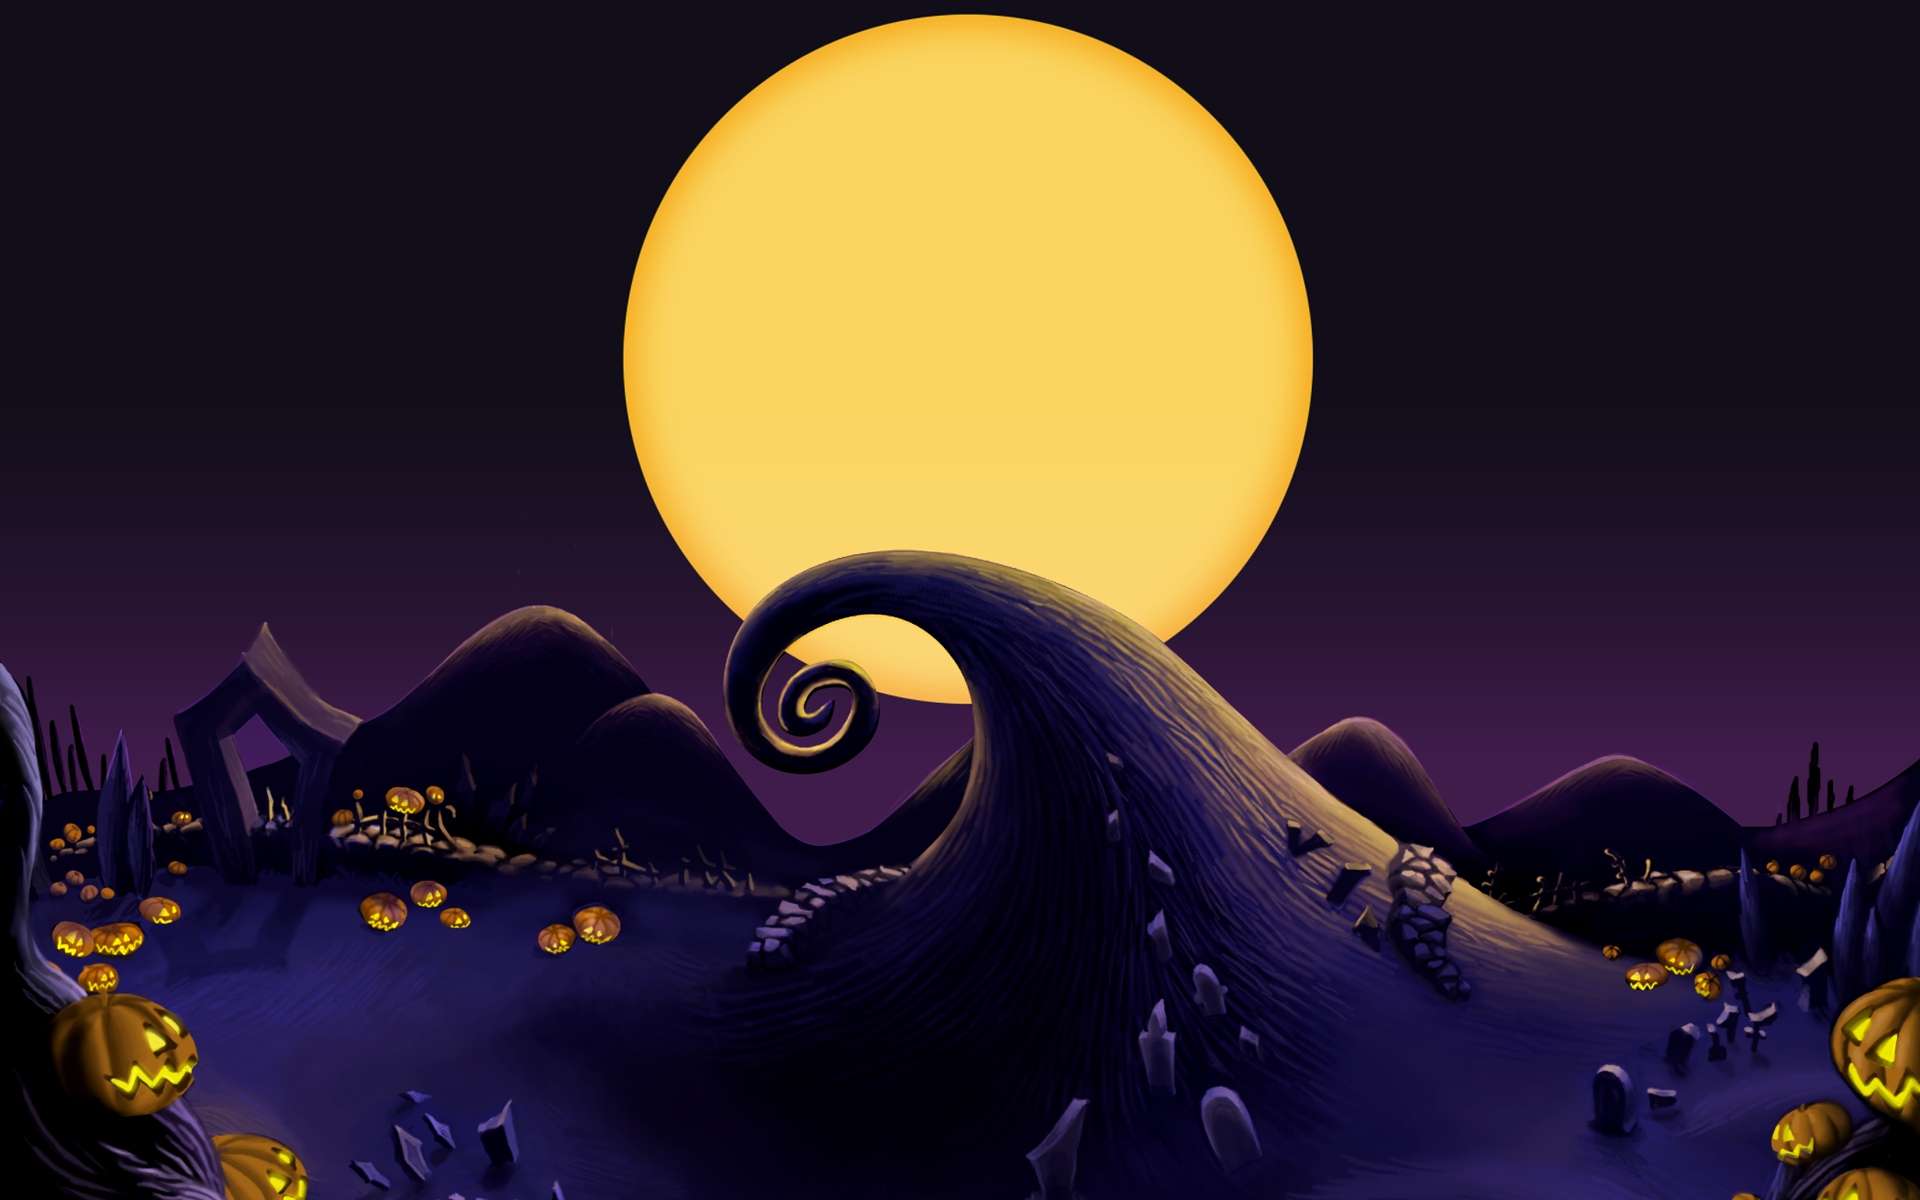 10 New Nightmare Before Christmas Screensavers FULL HD 1920×1080 For PC Background